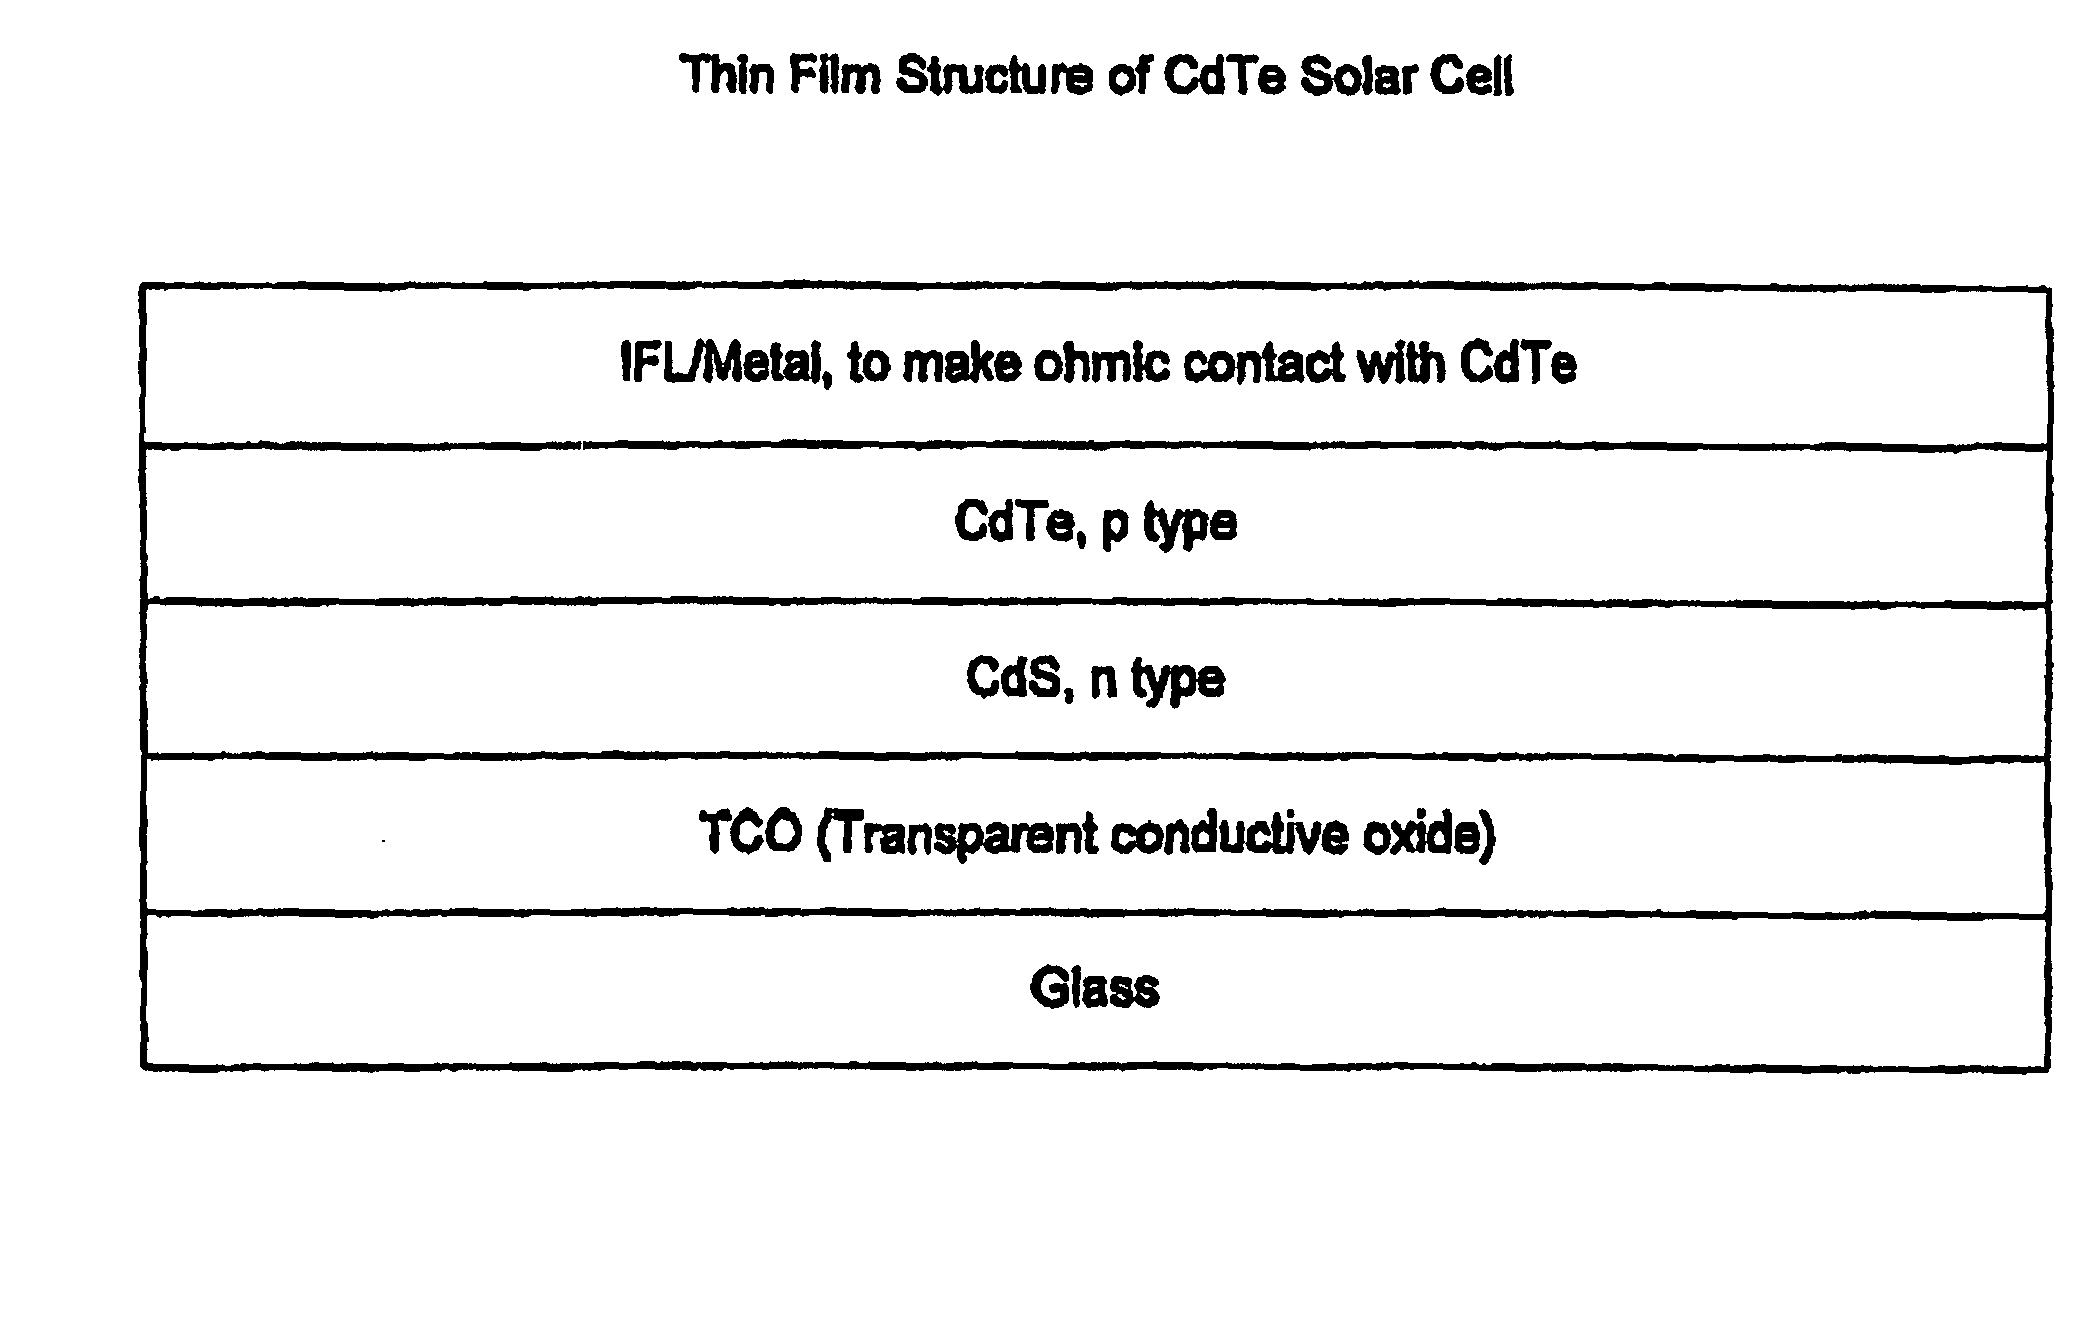 CdTe deposition process for solar cells